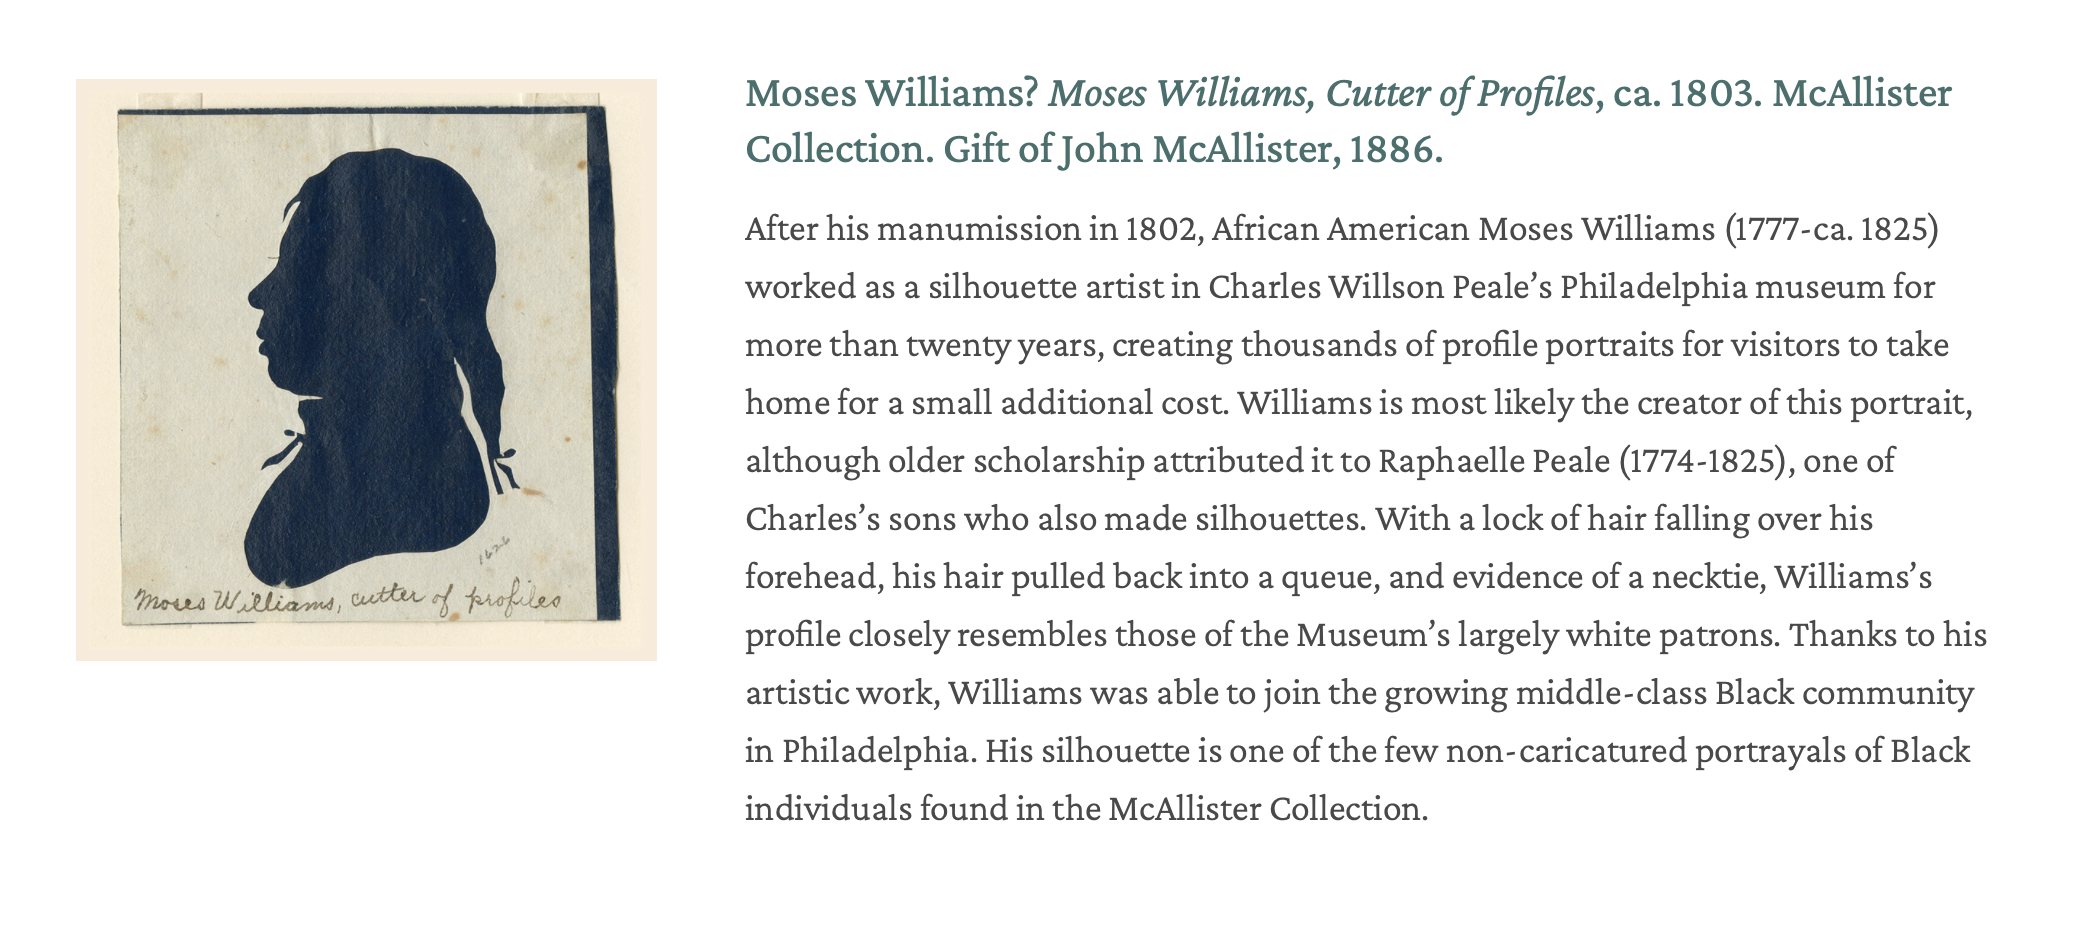 Detail of a profile silhouette of a man with a ponytail. Text to the right includes the title of the object ("Moses Williams, Cutter of Profiles") and an interpretive text.